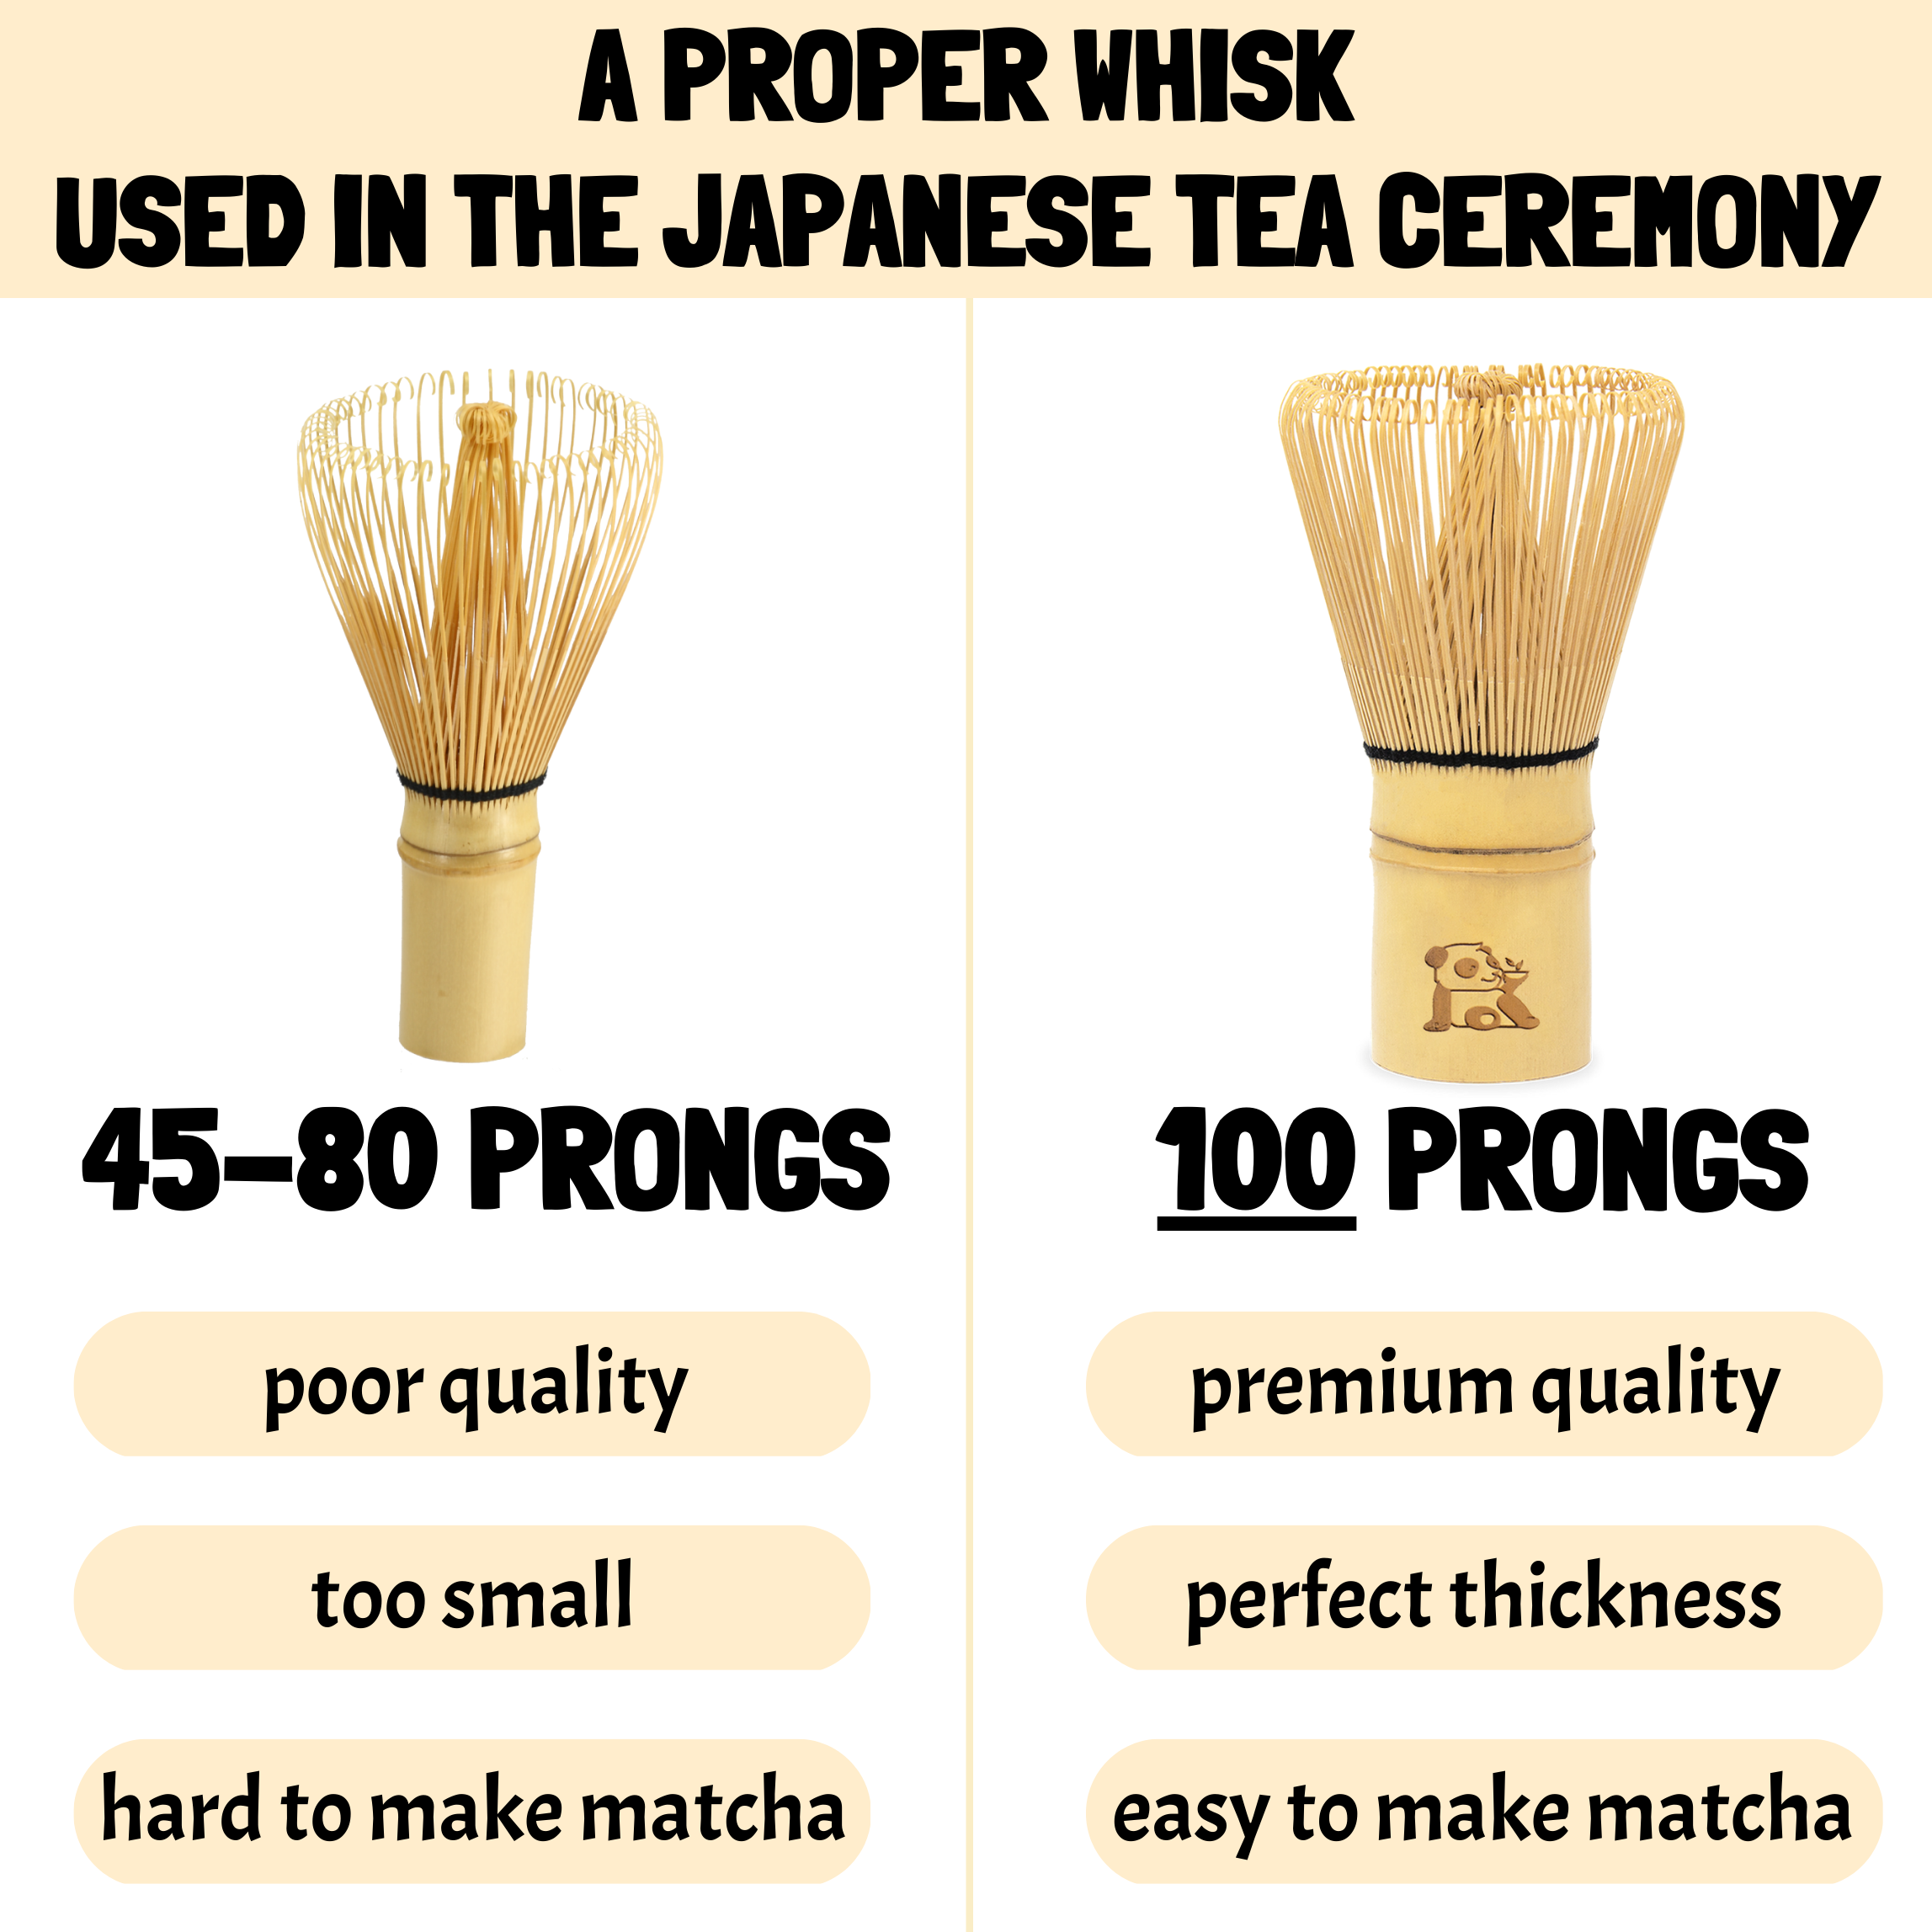 matcha whisk Chasen prongs 100 the best quality